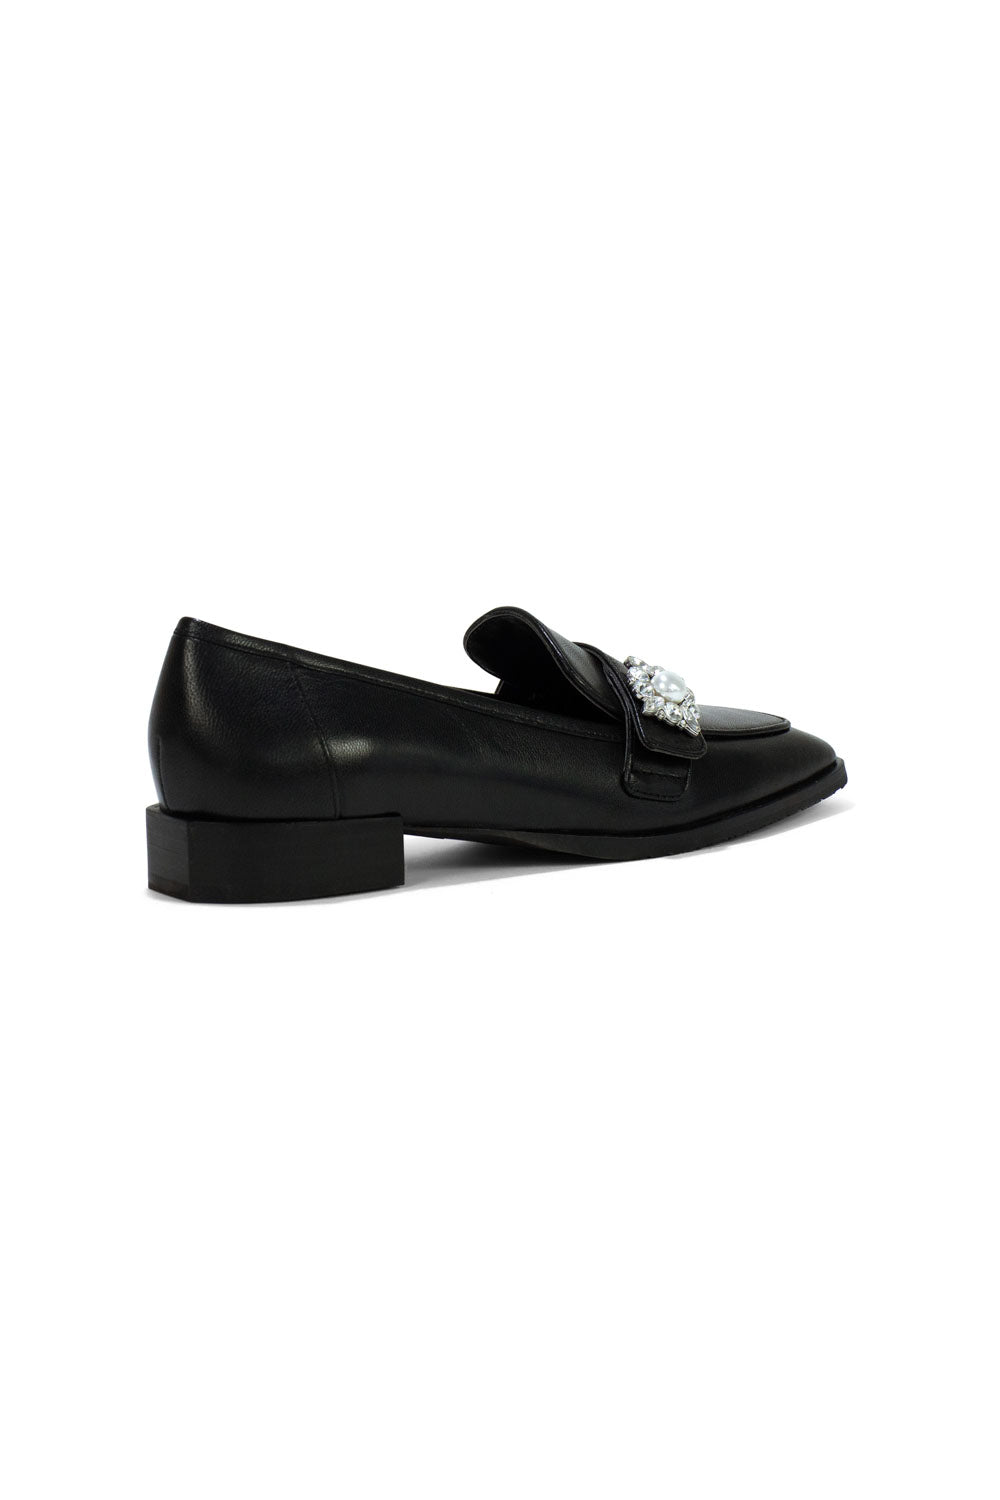 NYDJ Tracee Loafers In Leather - Black